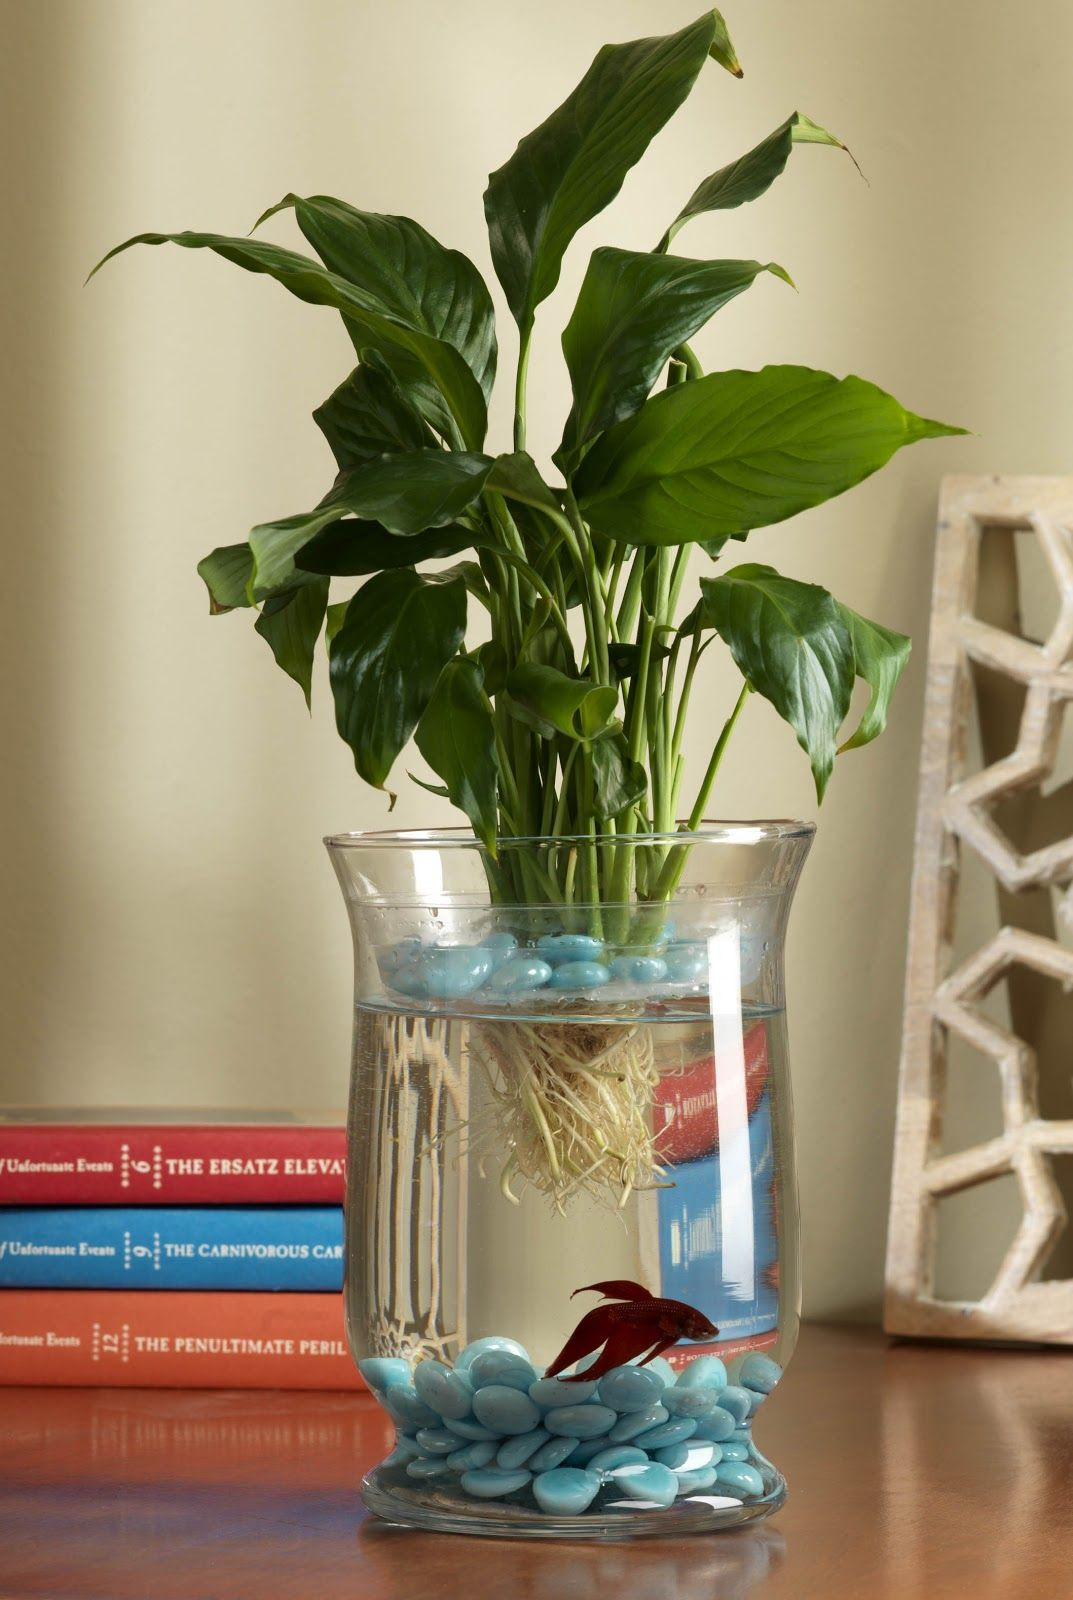 15 Stunning Plant Vase Fish Tank 2022 free download plant vase fish tank of create a living eco system did you know the peace lily plant acts within create a living eco system did you know the peace lily plant acts as a natural air purifier i